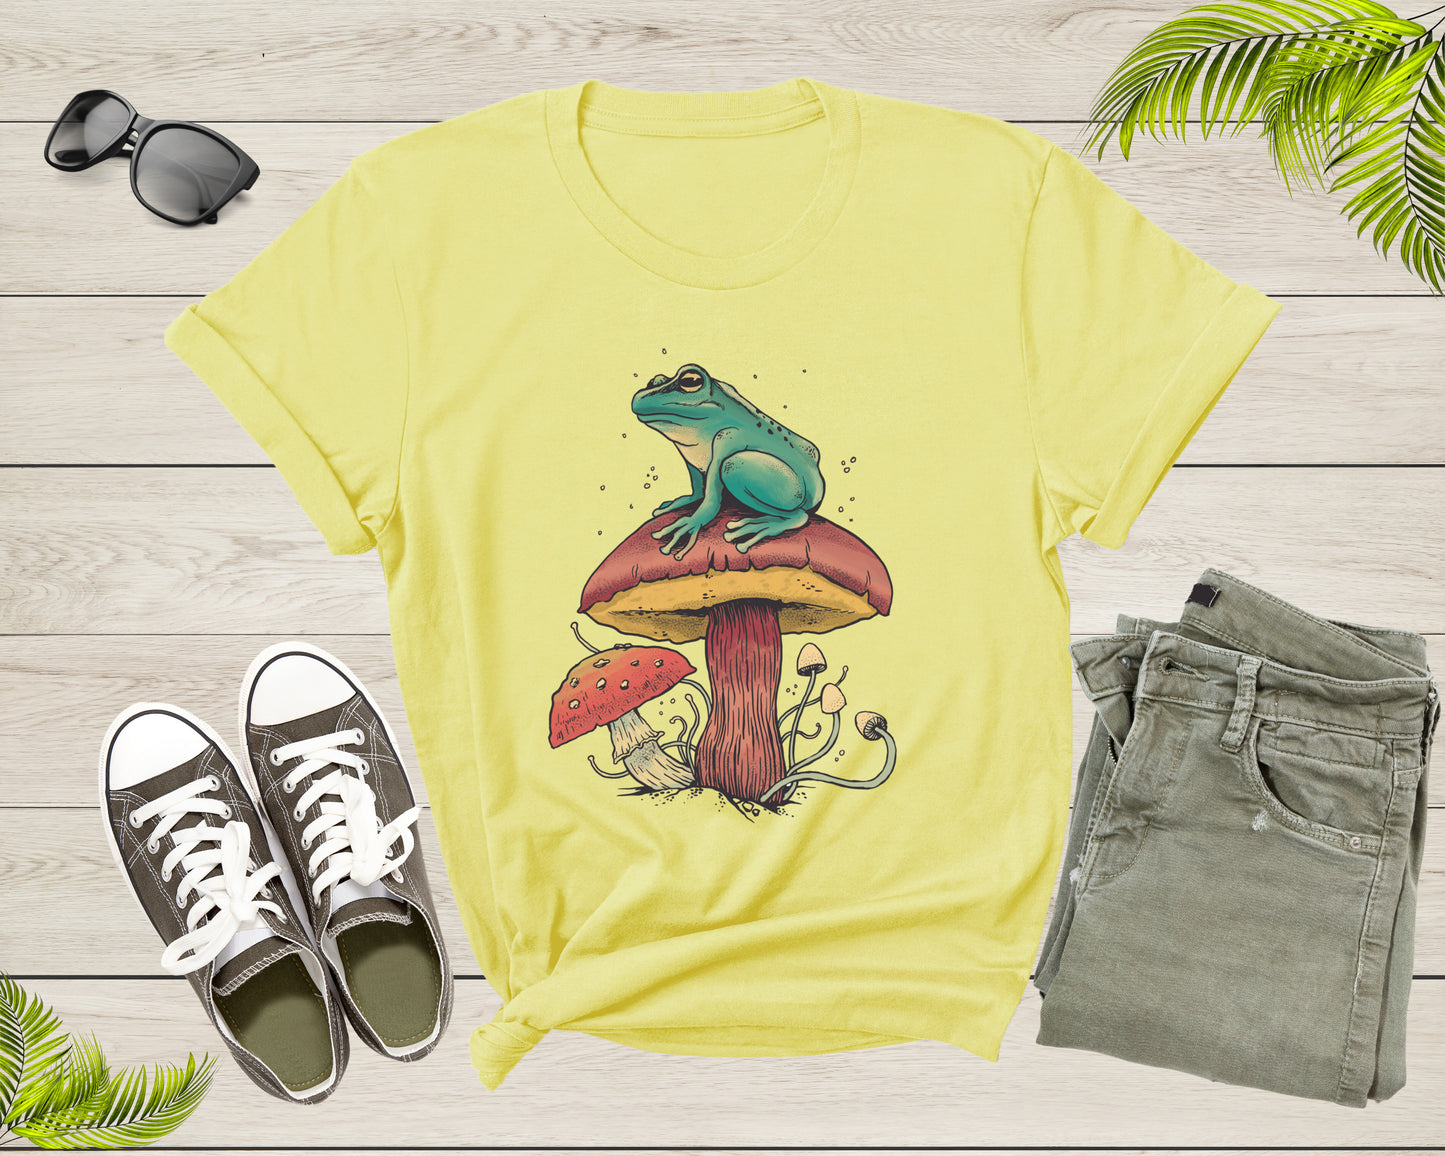 Cool Green Frog Toad Animal Sitting on Mushrooms Thinking T-Shirt Frog Lover Shirt Frog And Toad Mushroom Shirt Frog Lover Animal Tshirt